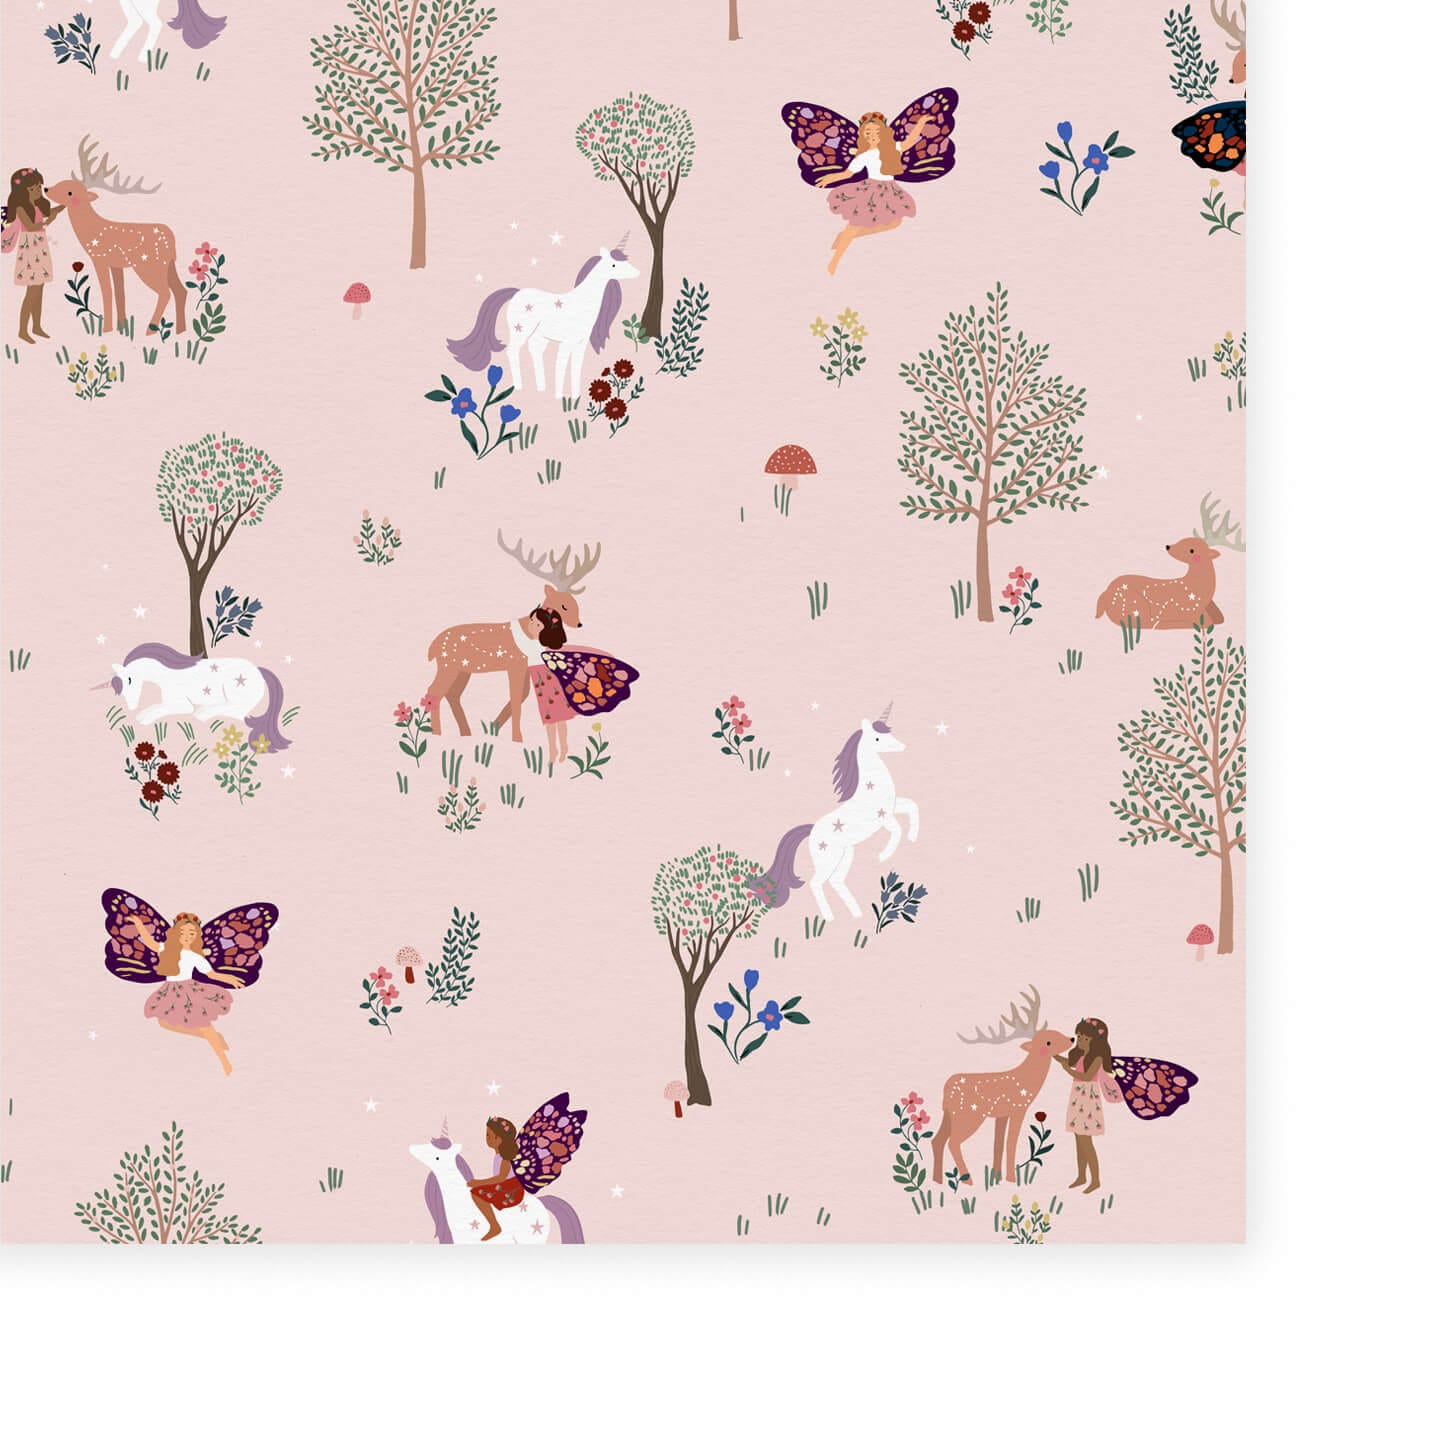 Wallpaper  of a magical forest with white and purple unicorns, red and white toadstools, brown deers and delicate fairies. Flowers and trees with a pink background.